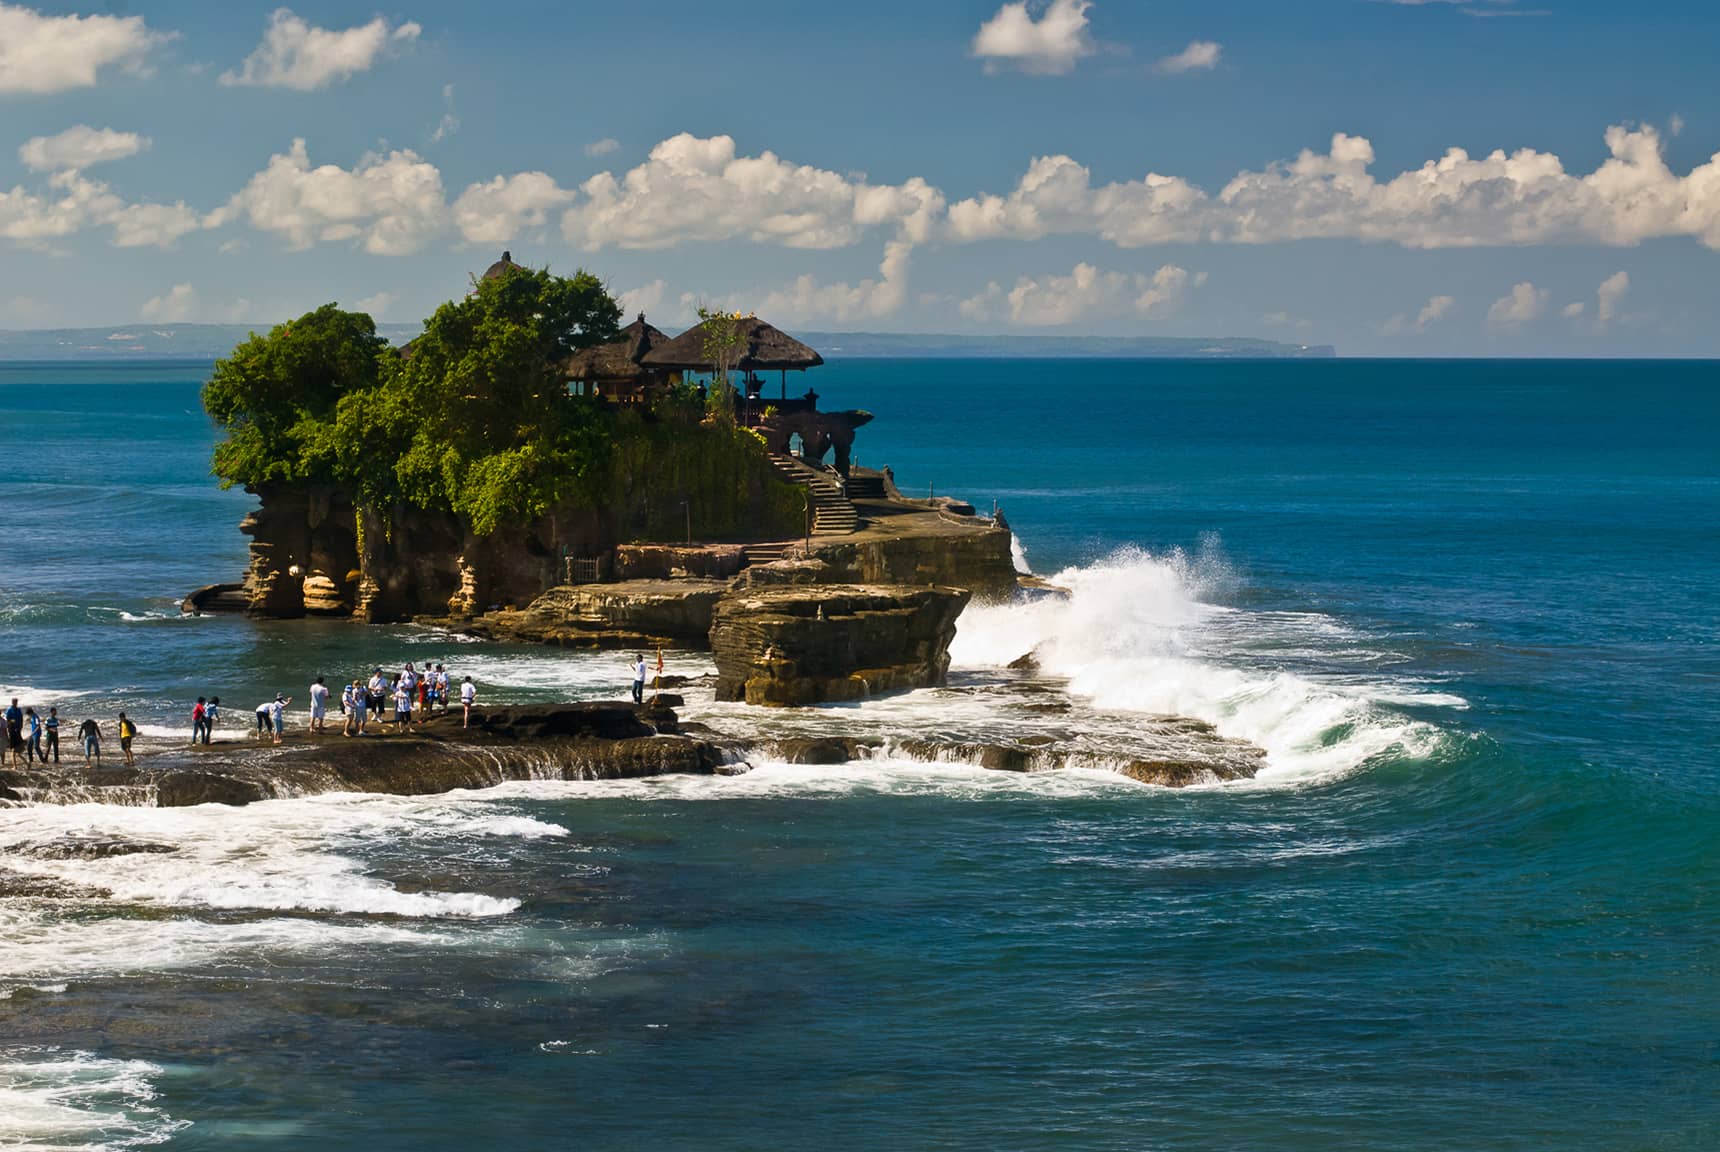 Professional photos of Hindu temples in Bali - the main Tanah Lot temple